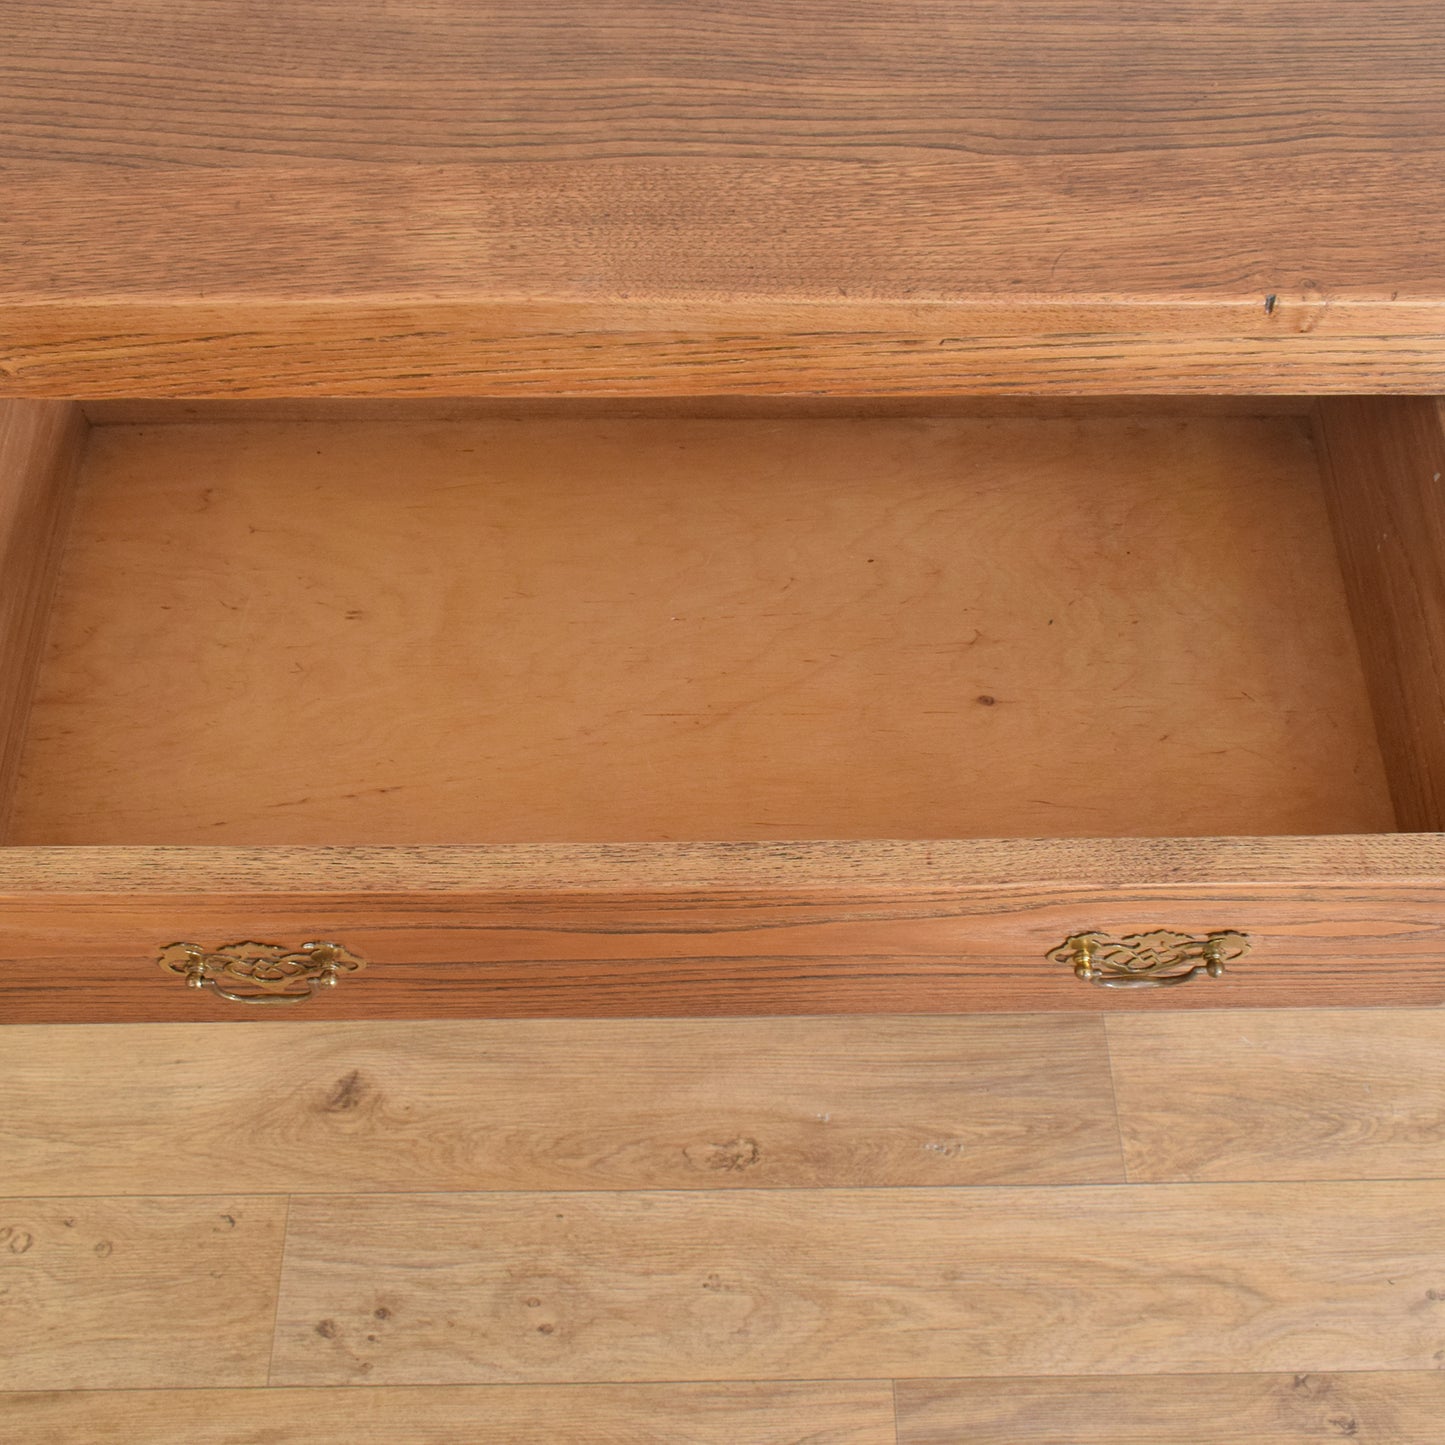 Oak Chest Of Drawers